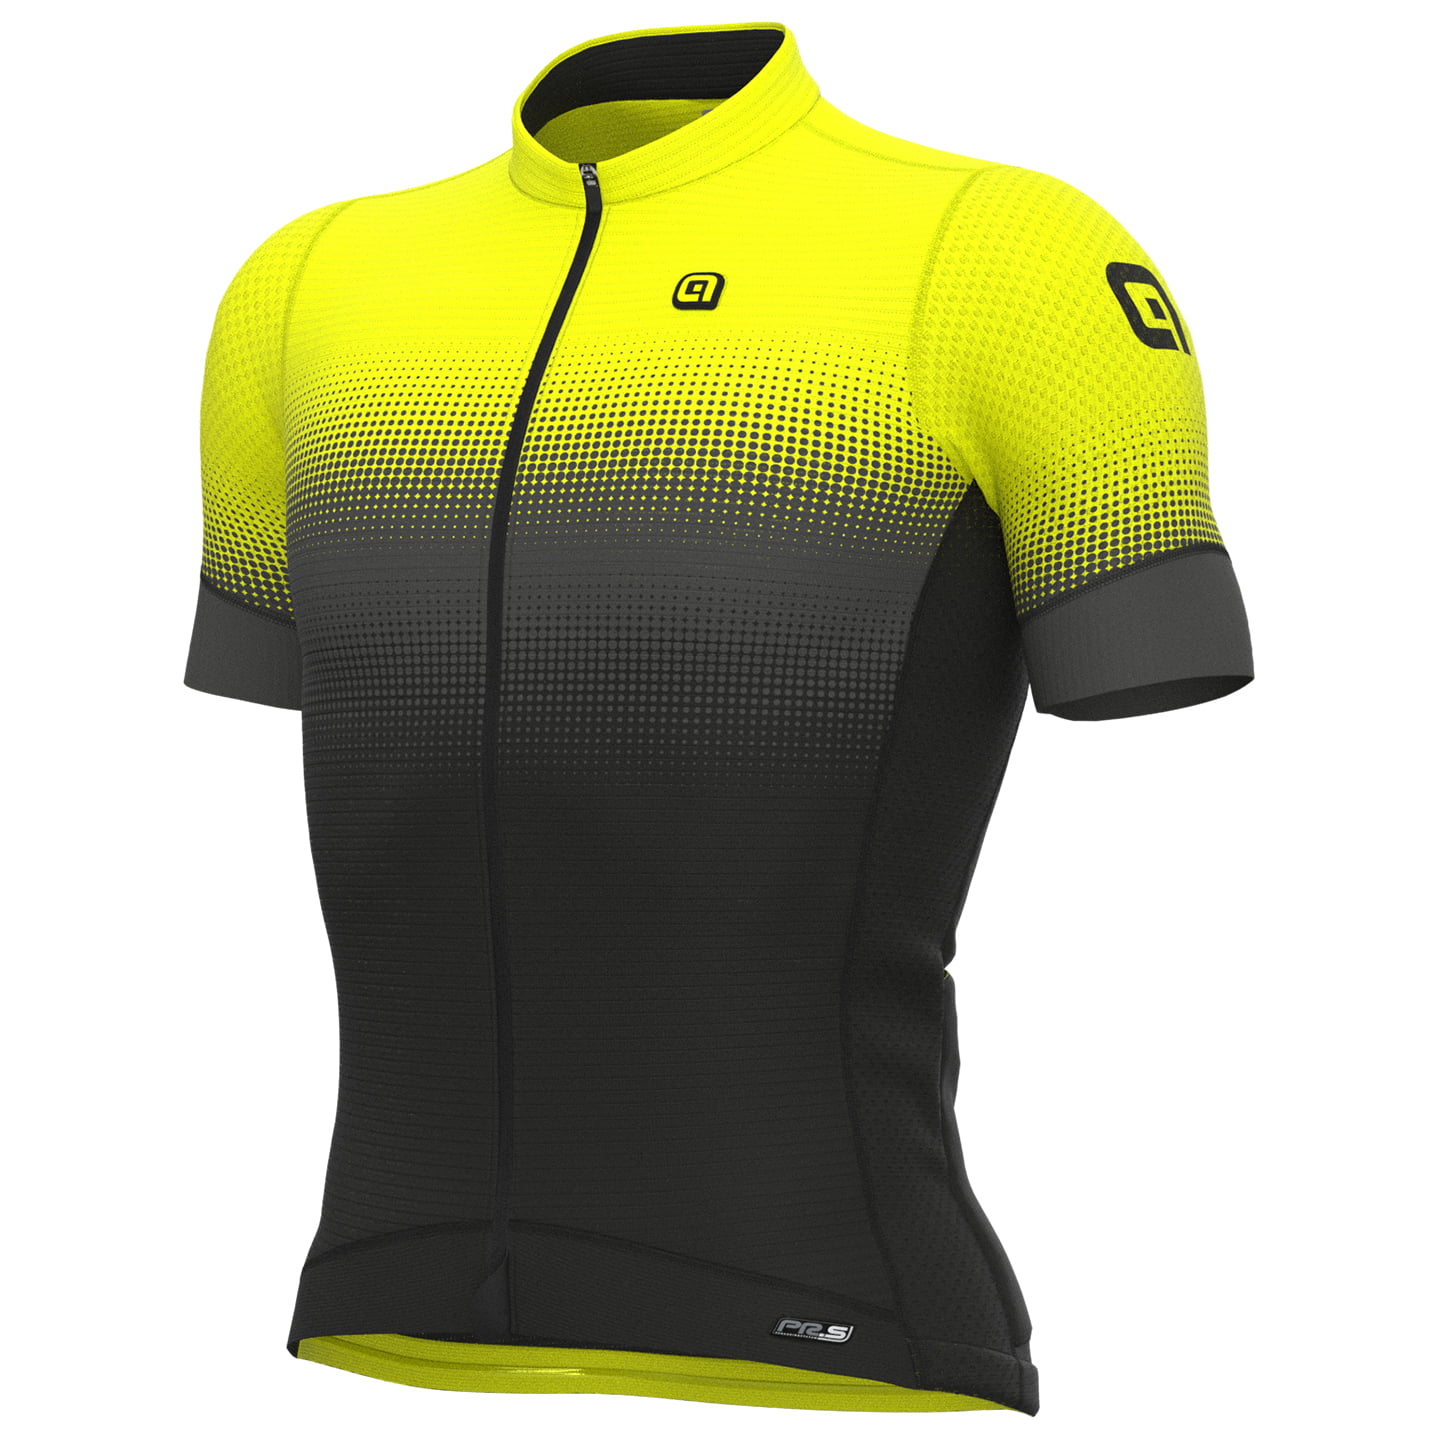 ALE Gradient Short Sleeve Jersey Short Sleeve Jersey, for men, size L, Cycling jersey, Cycling clothing